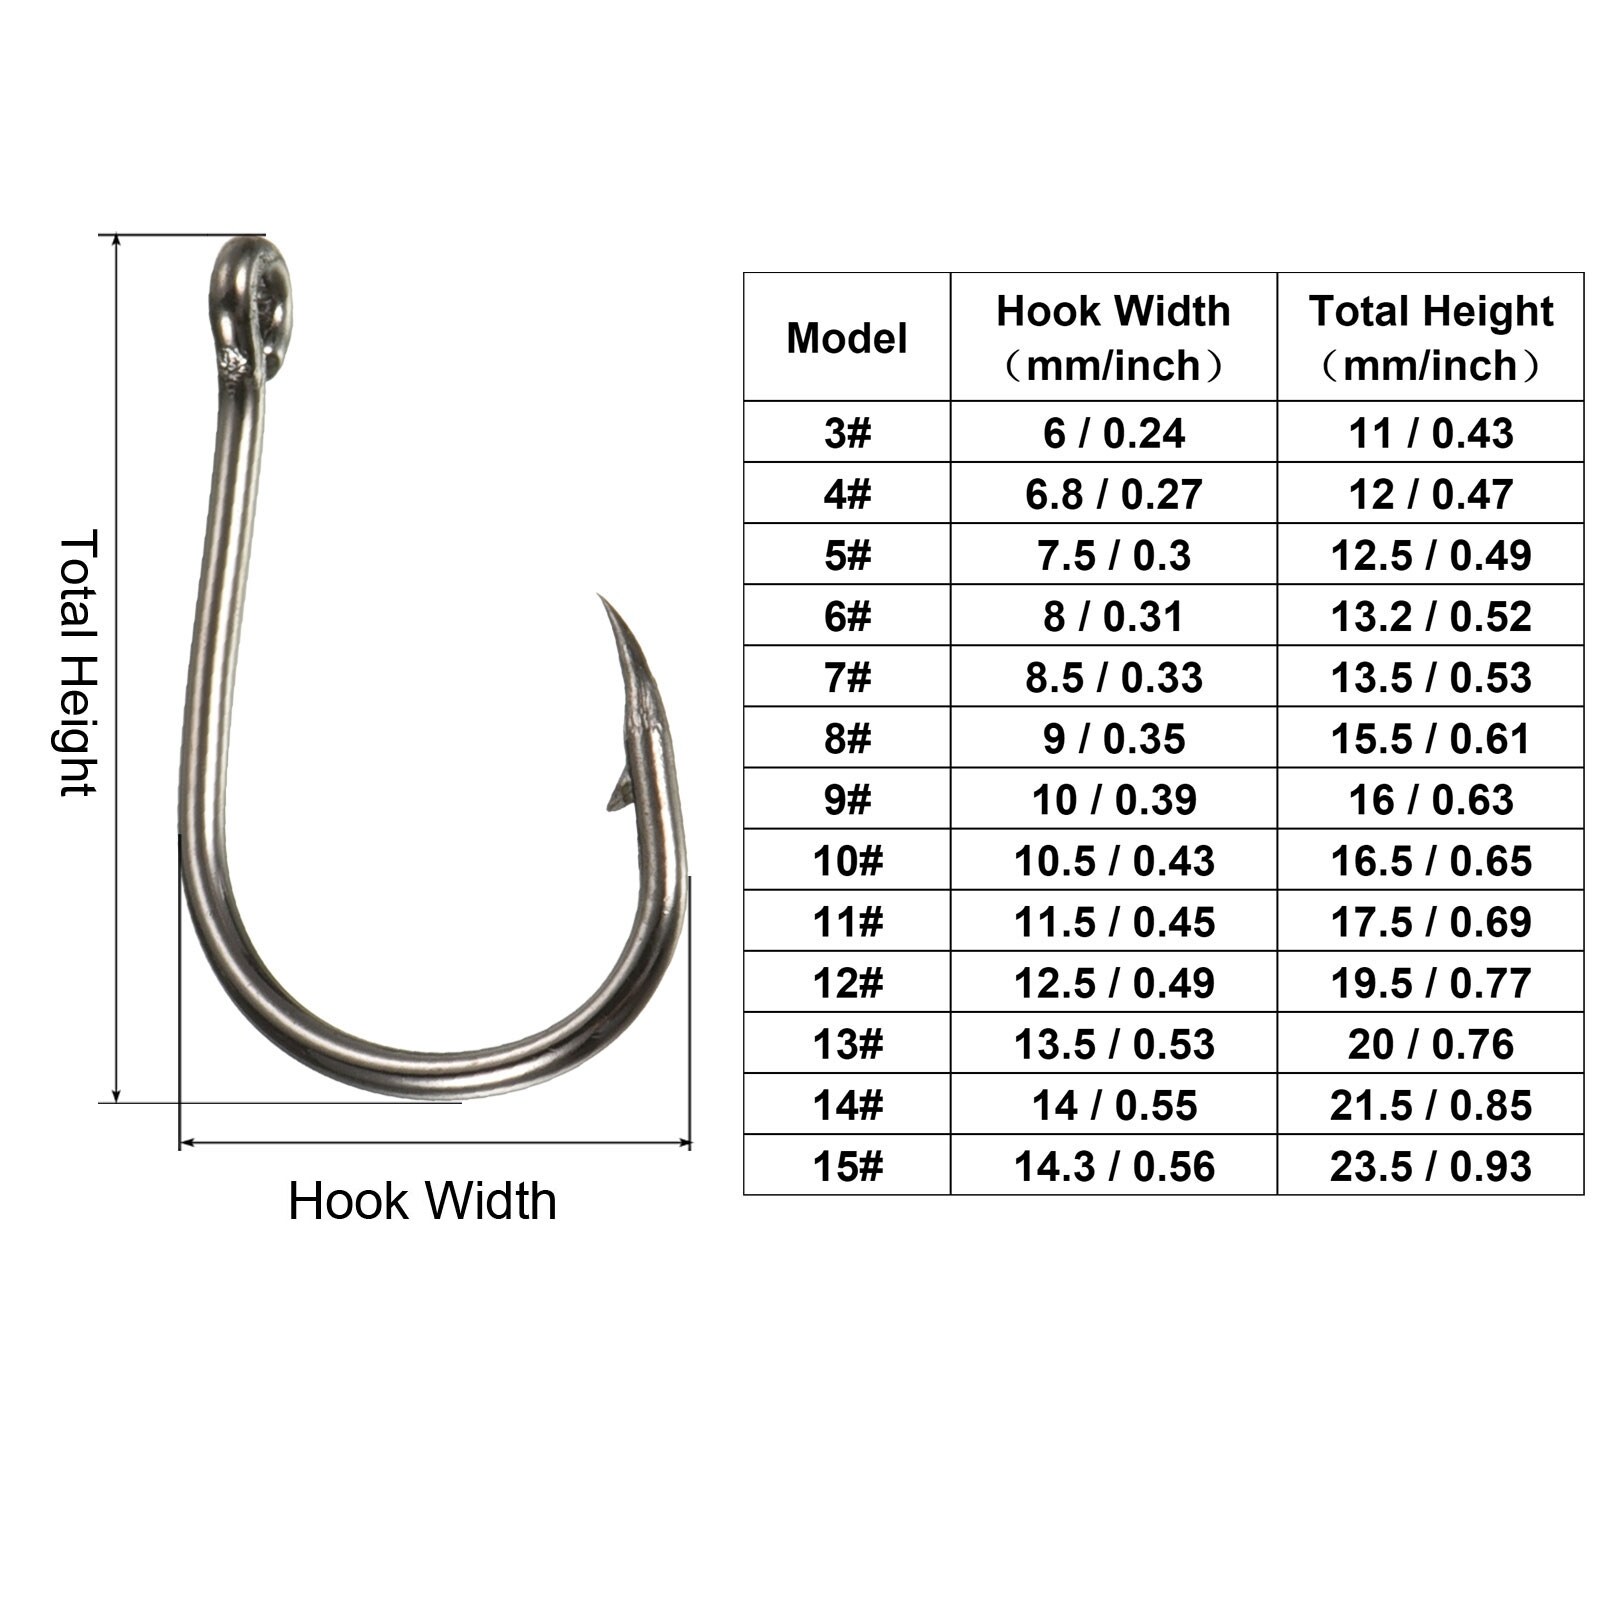 SPRING PARK 100Pcs High Carbon Steel Fishing Hooks，10 Sizes Fishing Hooks  ,Strong Sharp Fish Hook with Barbs for Freshwater/Seawater